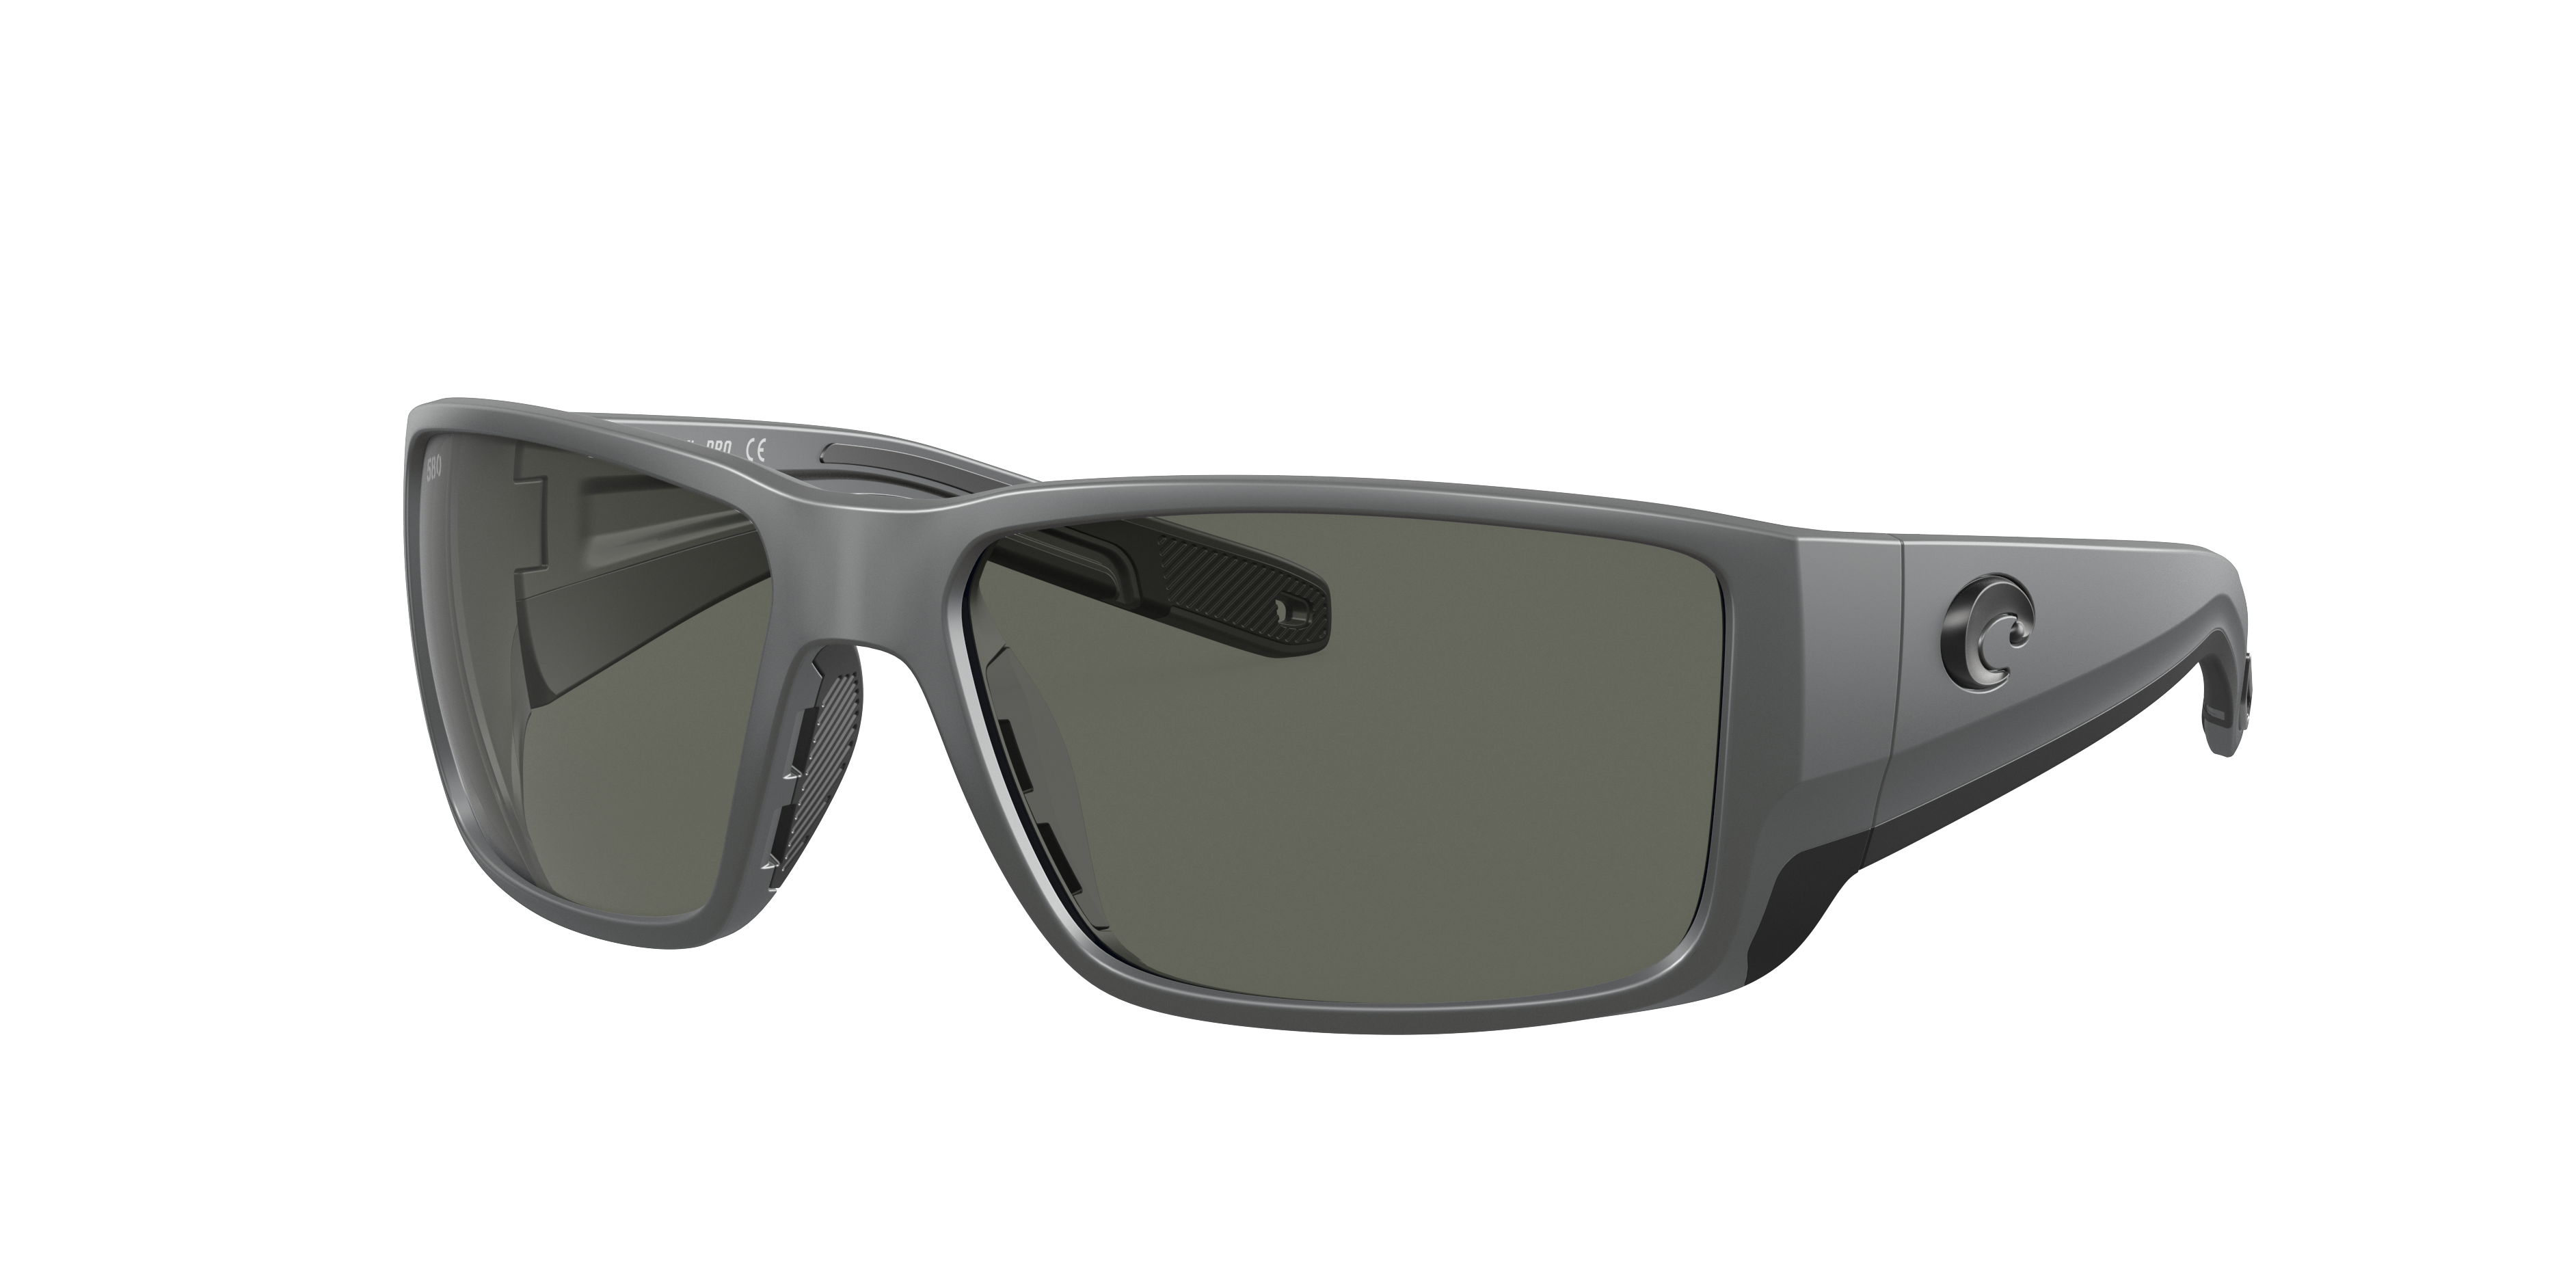 Pro Series – Best Sunglasses for anglers